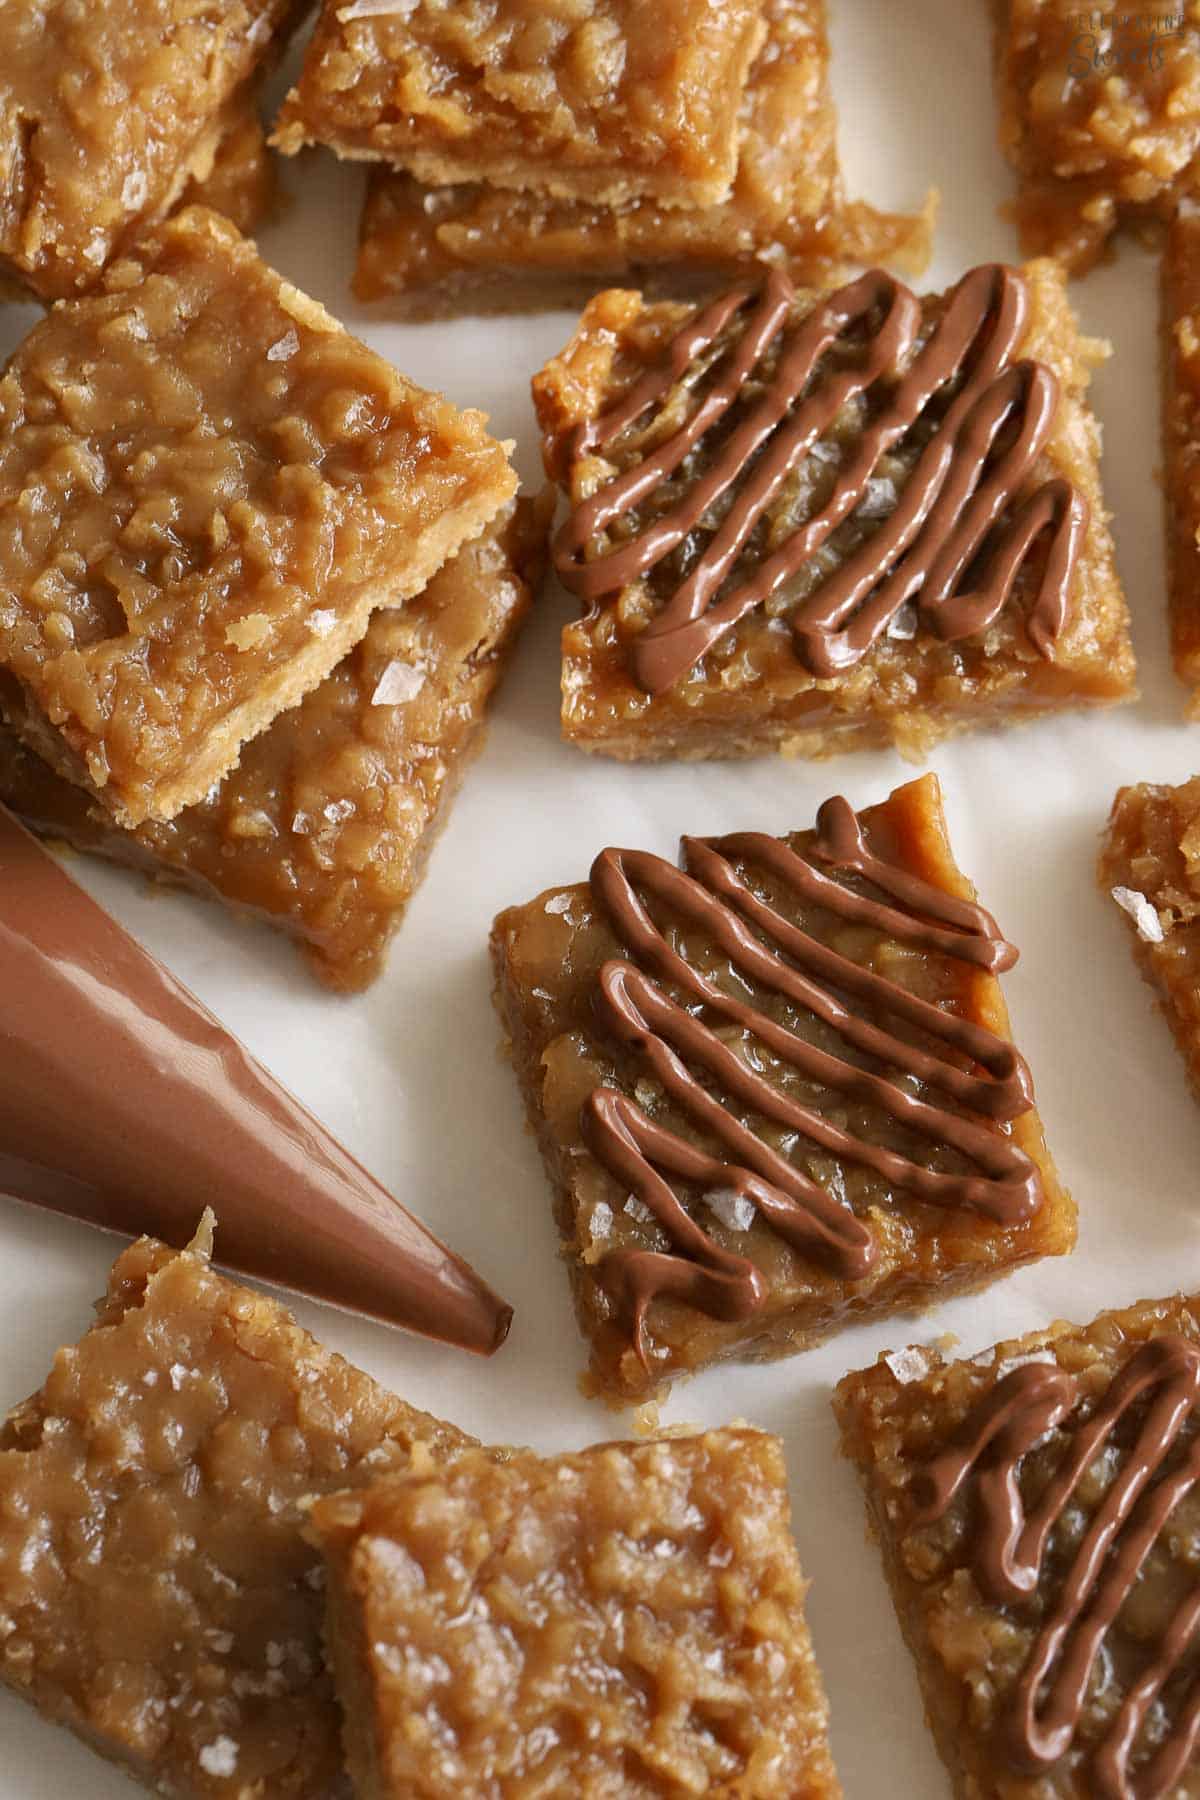 Caramel coconut bars on a piece of parchment paper next to a piping bag filled with melted chocolate.